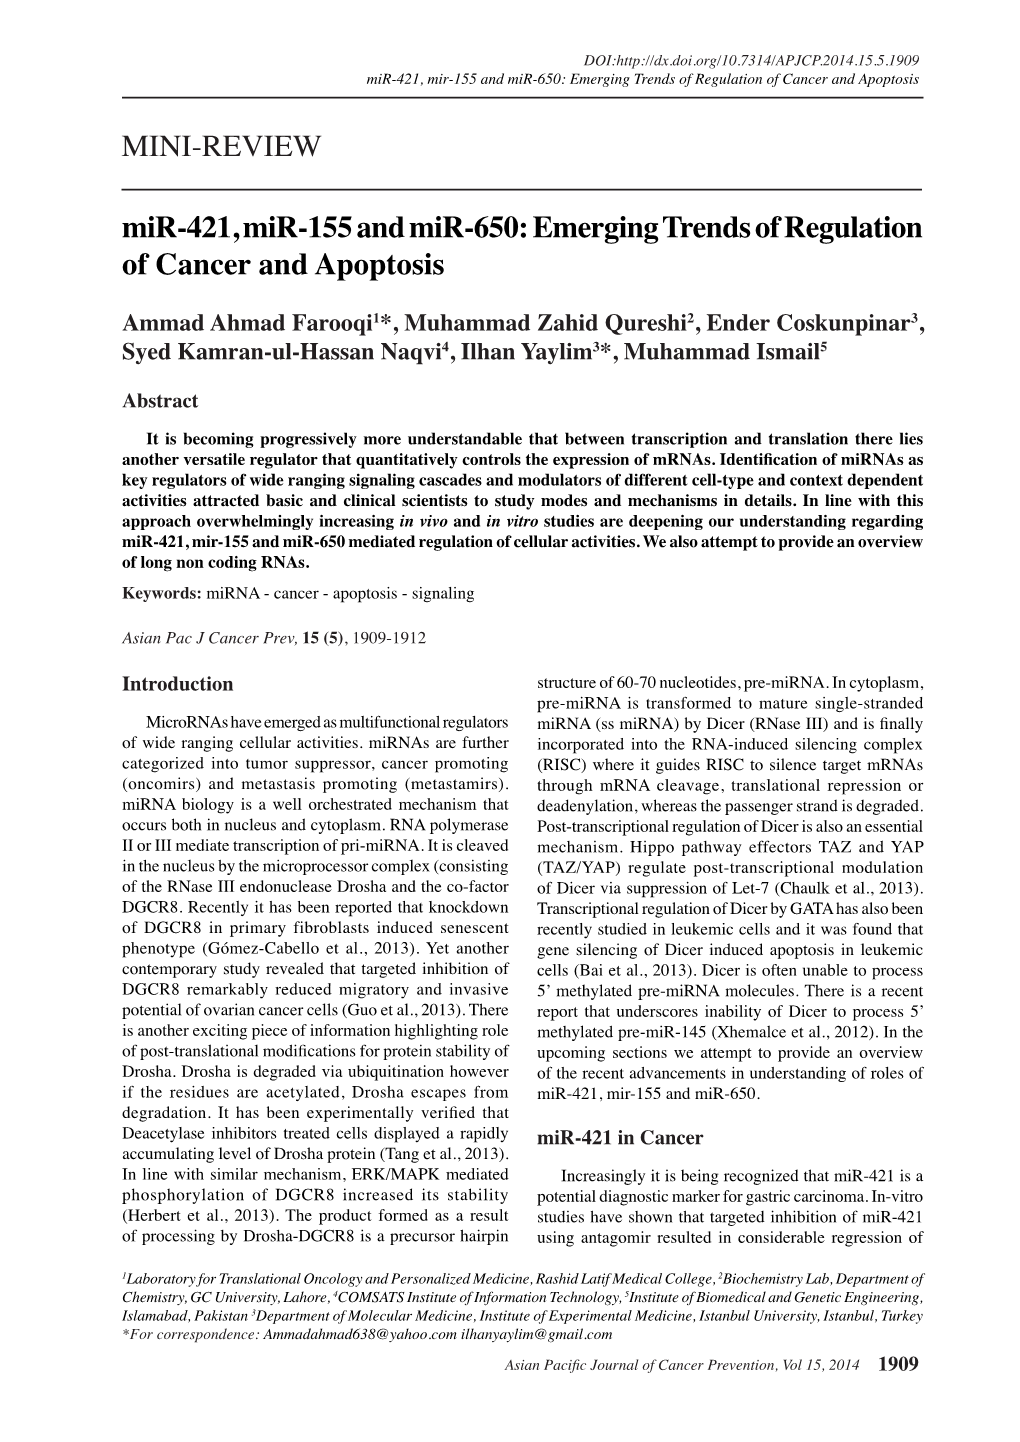 Mir-421, Mir-155 and Mir-650: Emerging Trends of Regulation of Cancer and Apoptosis